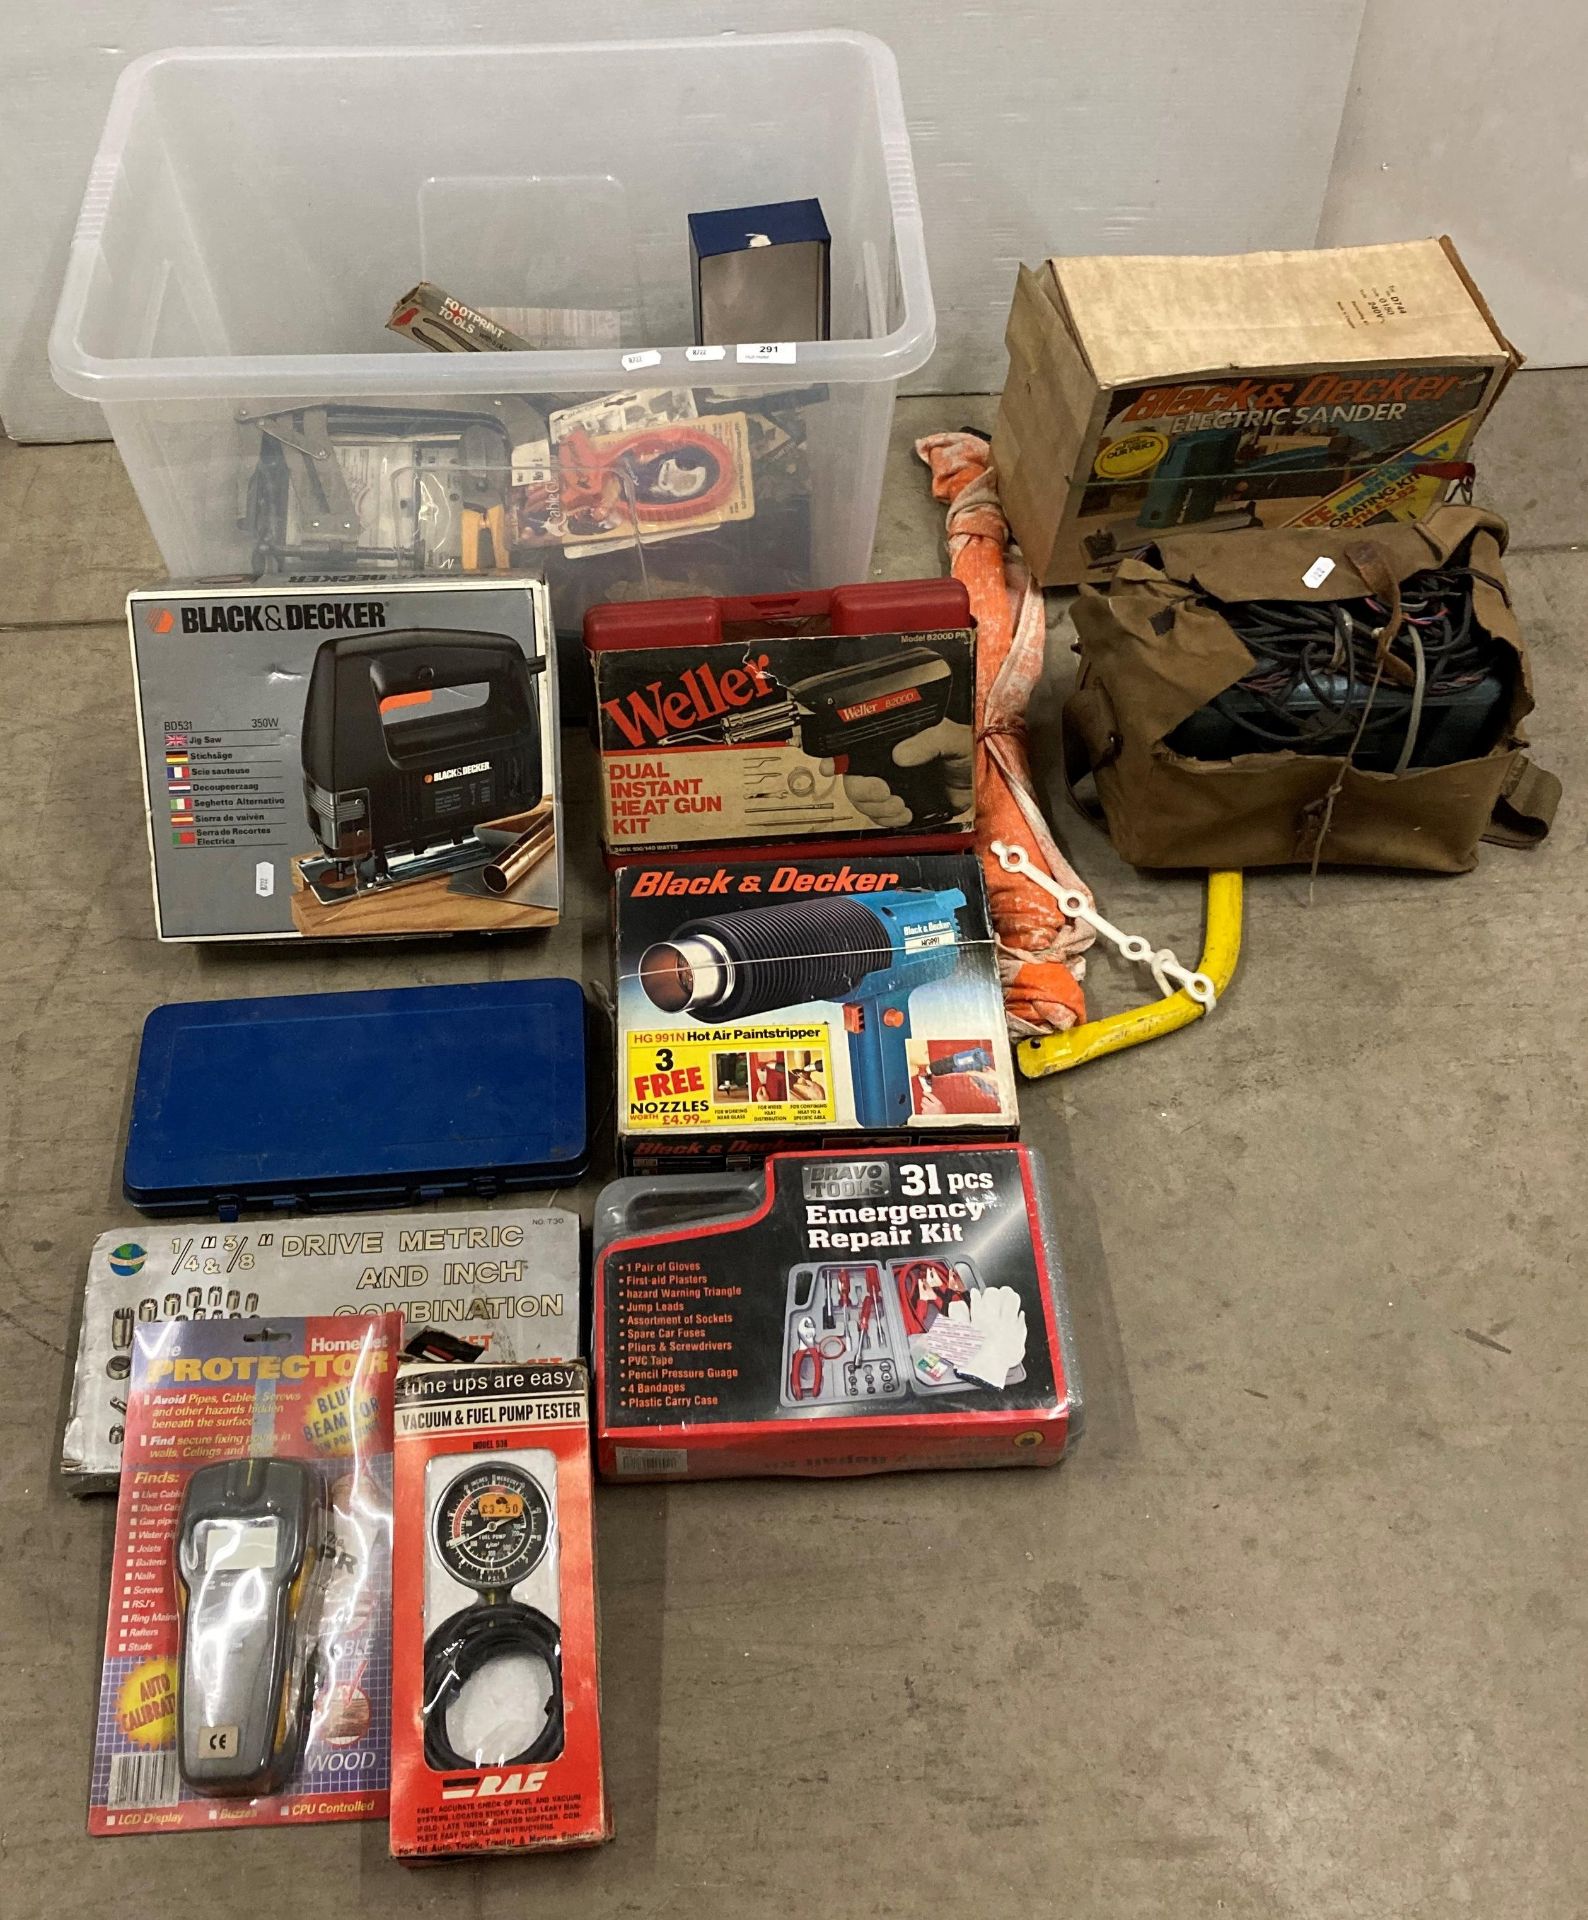 Contents to box - assorted hand tools including power-tools, jigsaw, sander, heat-gun,